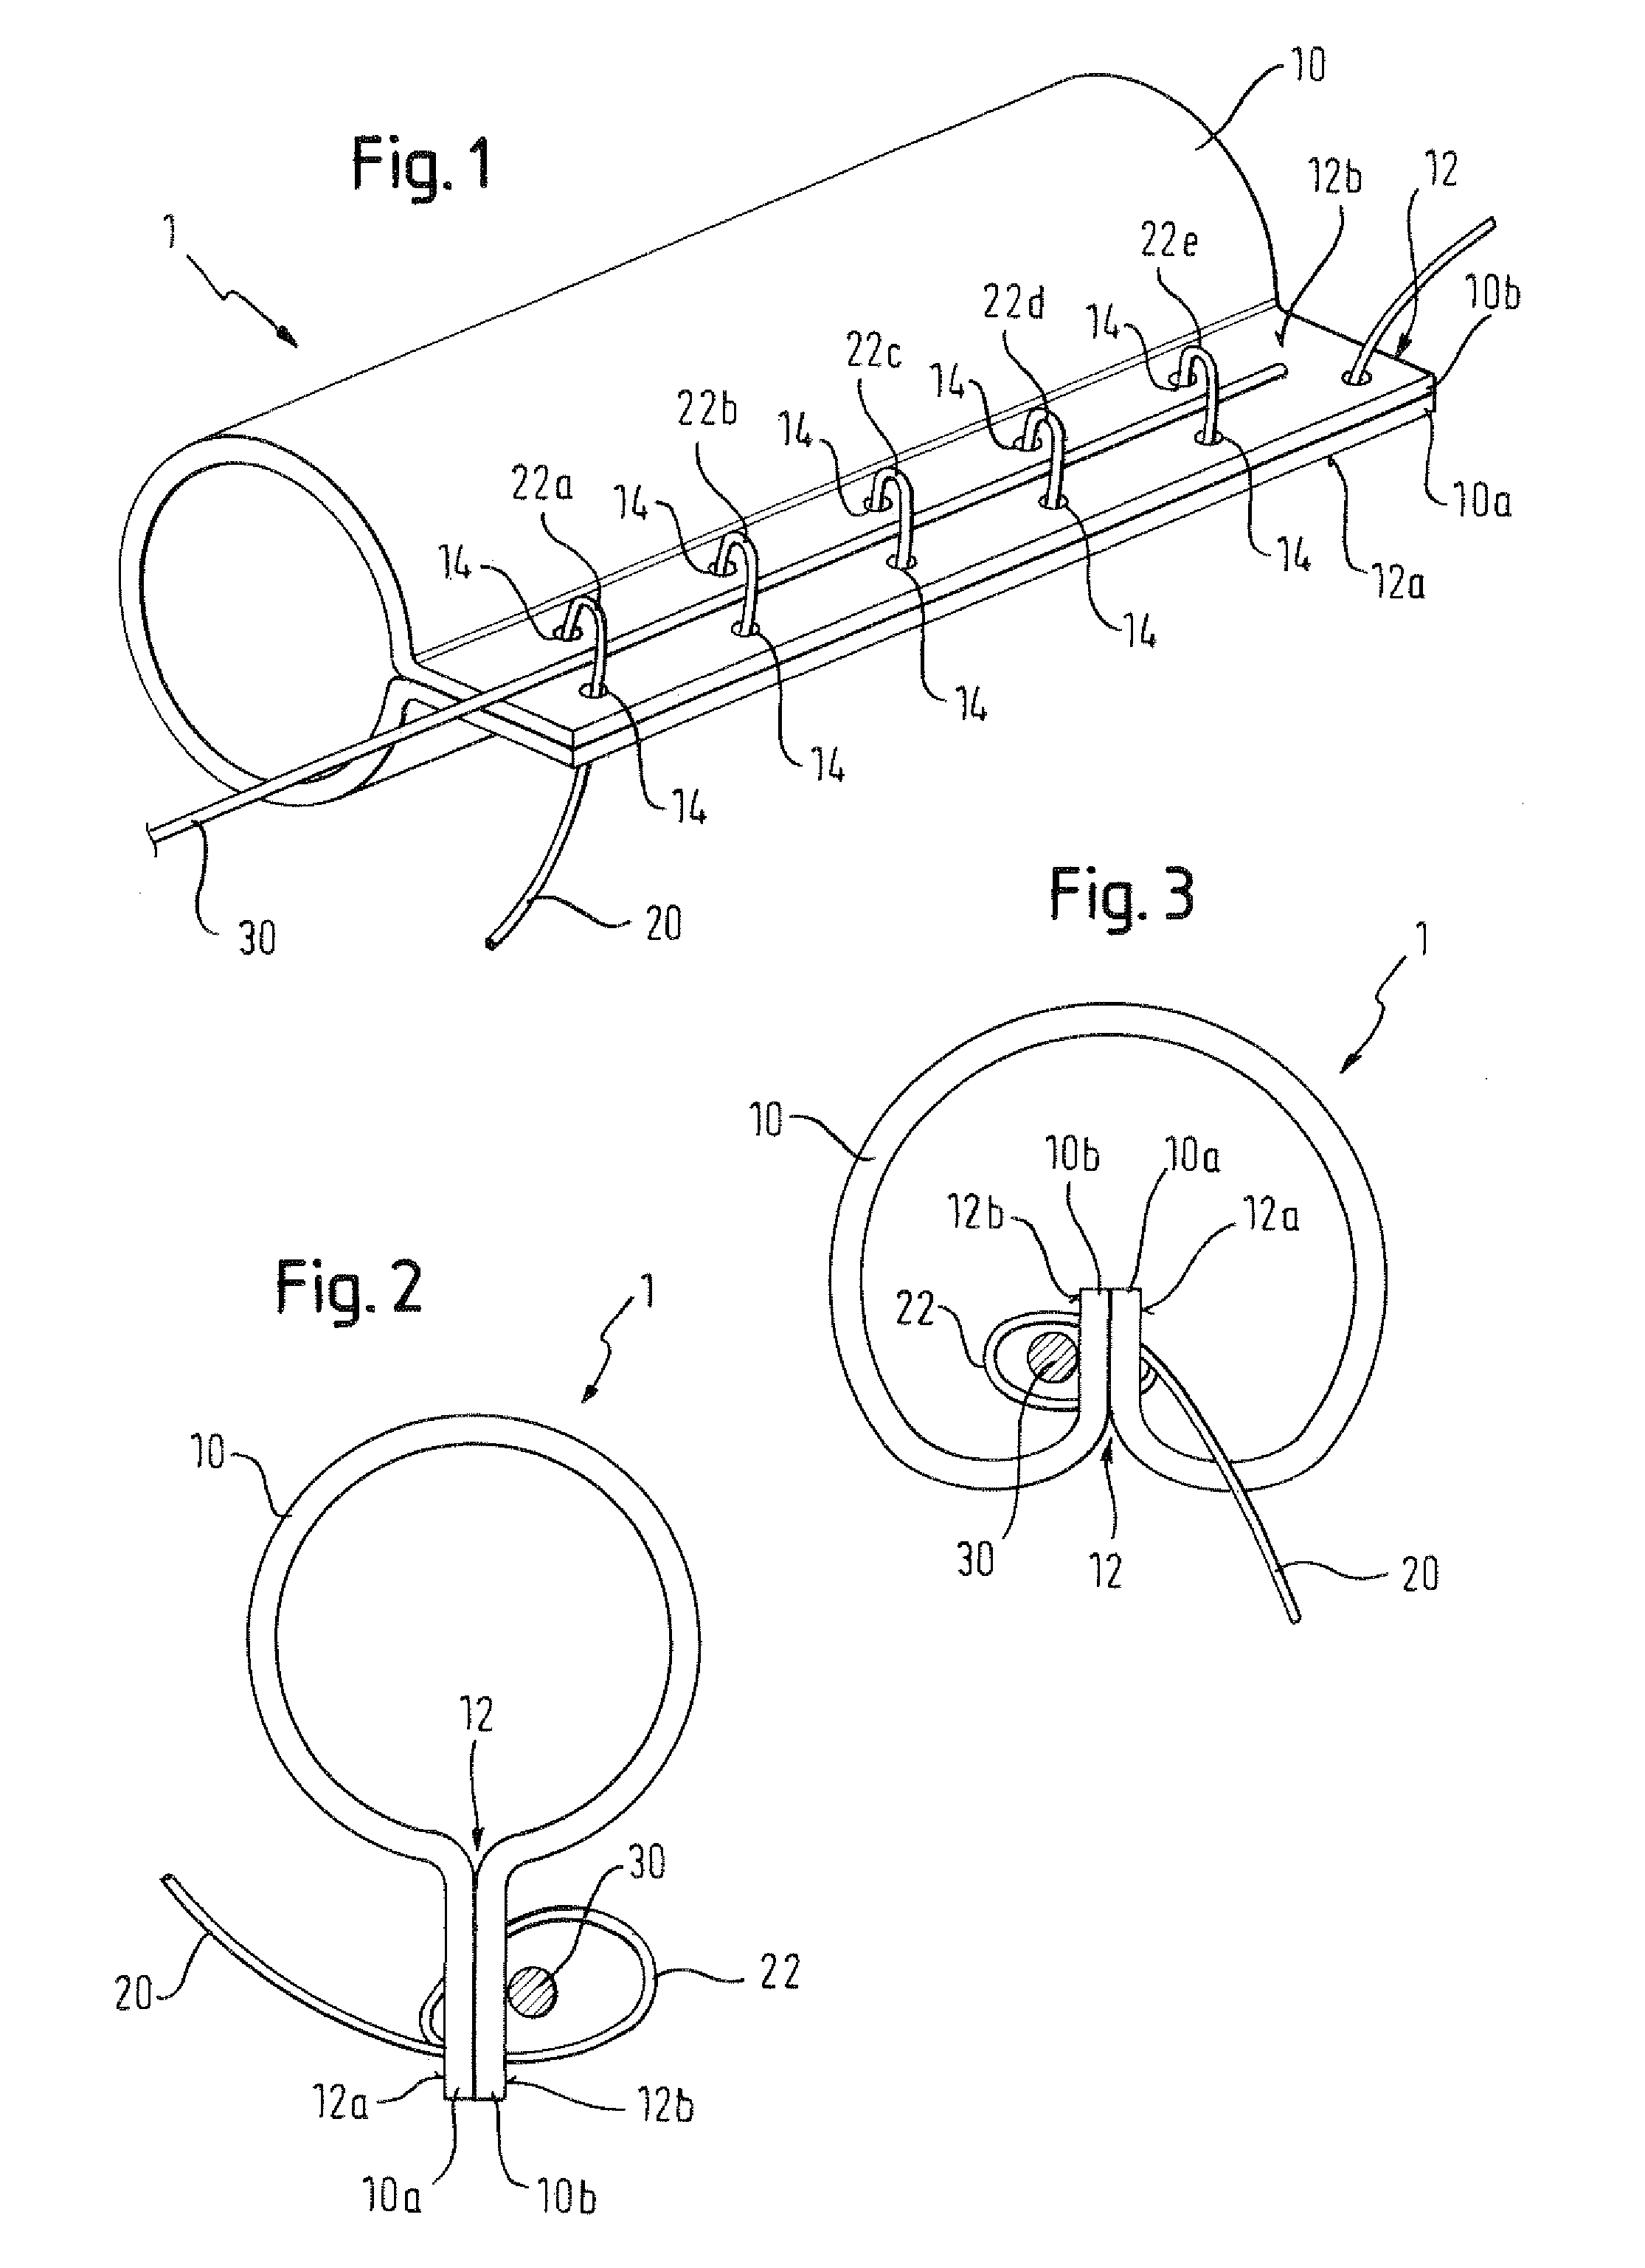 Catheter sheath for implant delivery